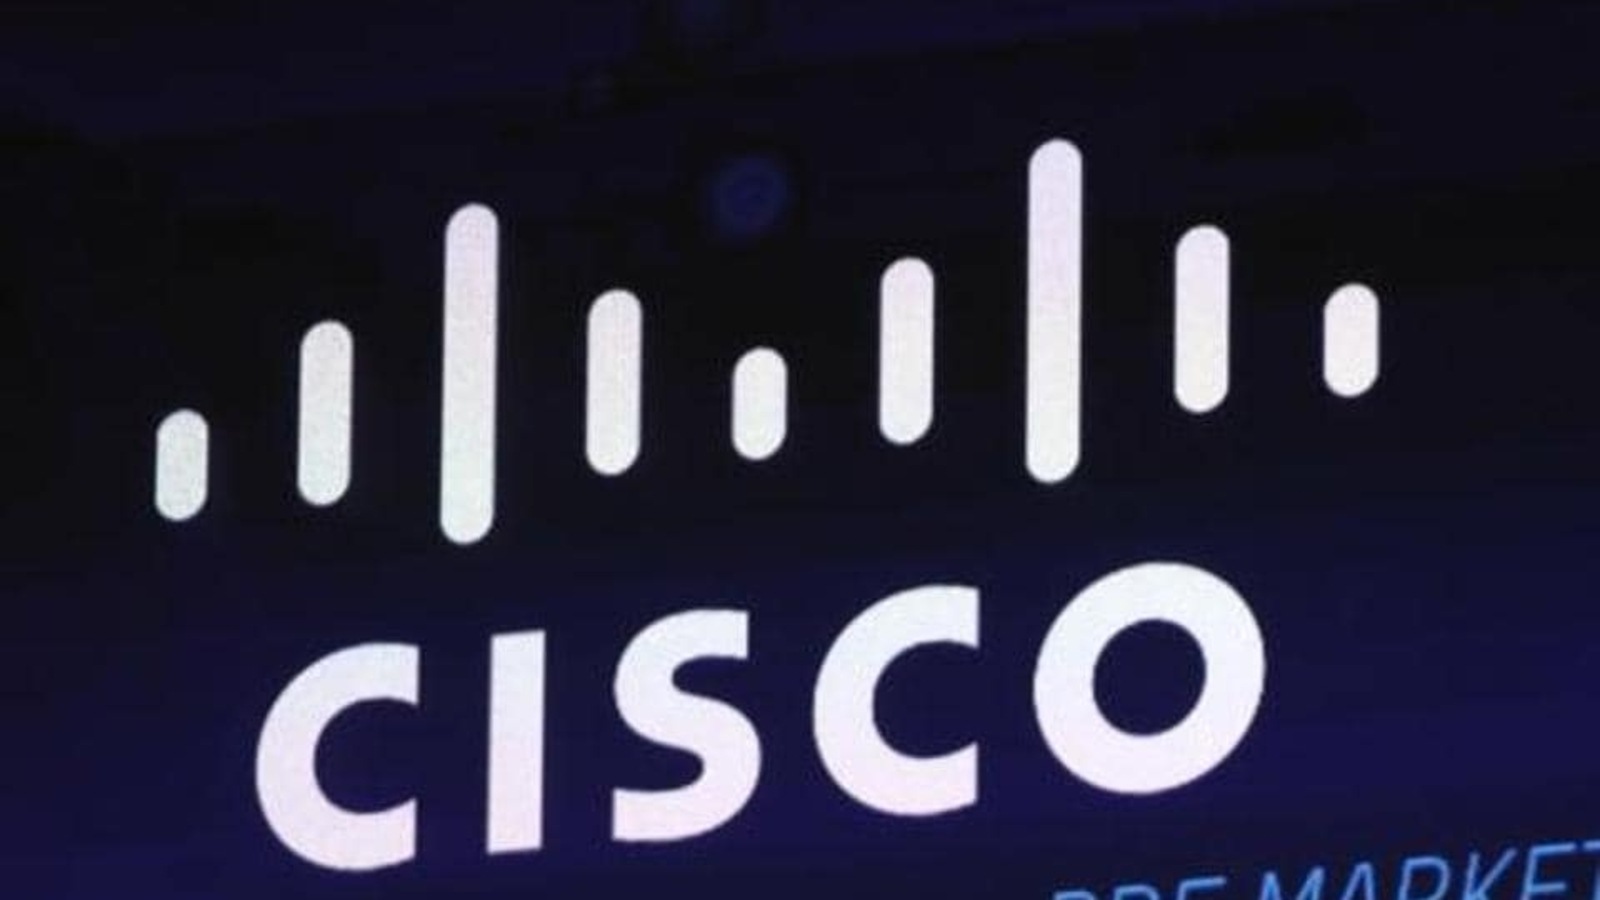 Cisco to Buy Splunk for $28 Billion in Giant AI-Powered Data Bet